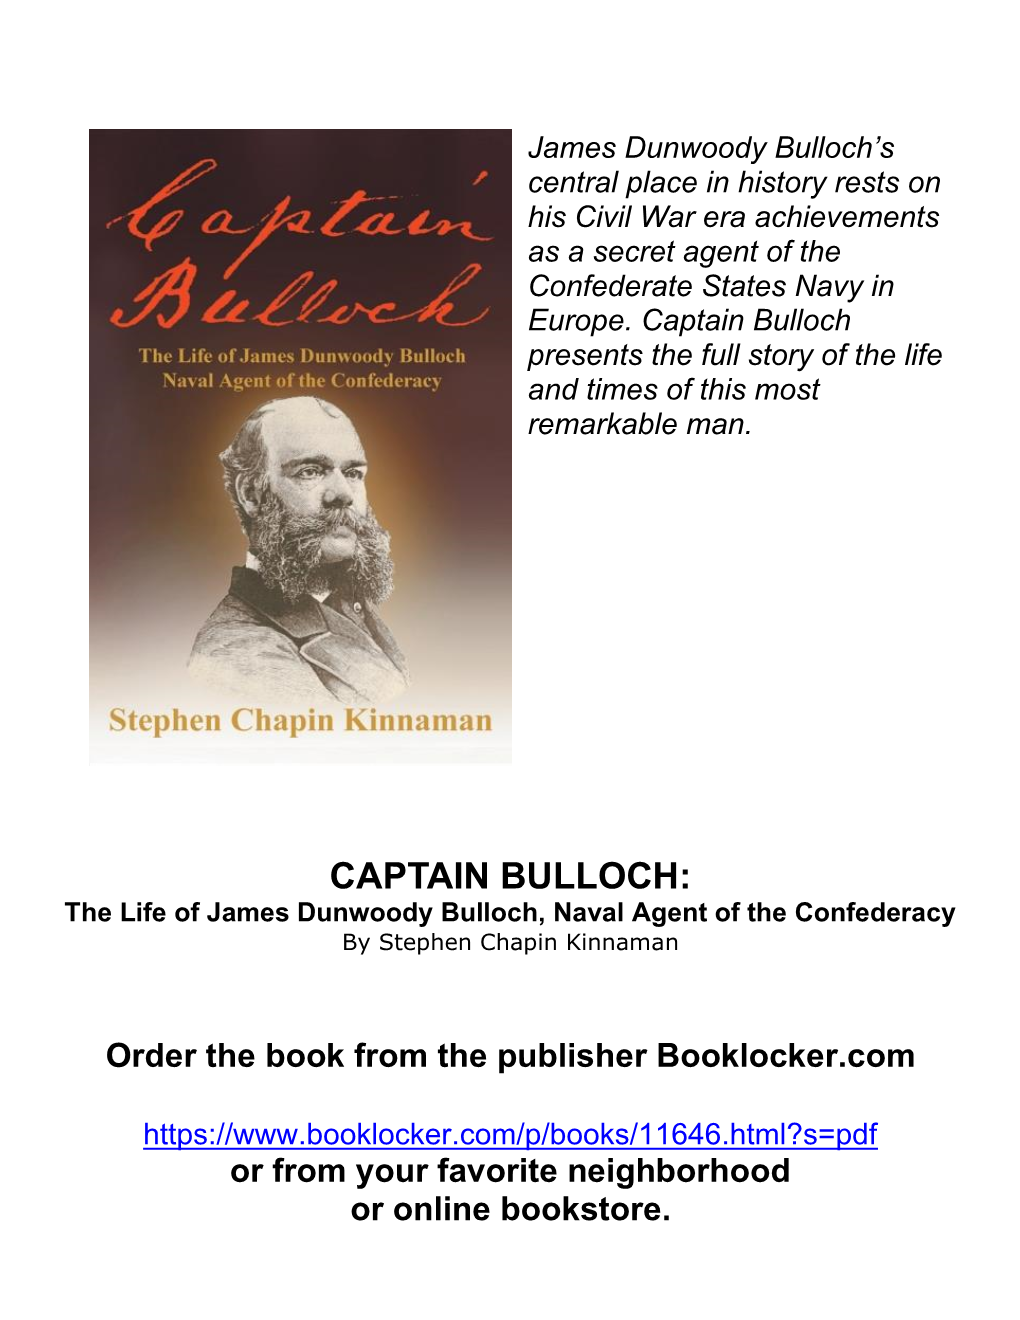 The Life of James Dunwoody Bulloch, Naval Agent of the Confederacy by Stephen Chapin Kinnaman